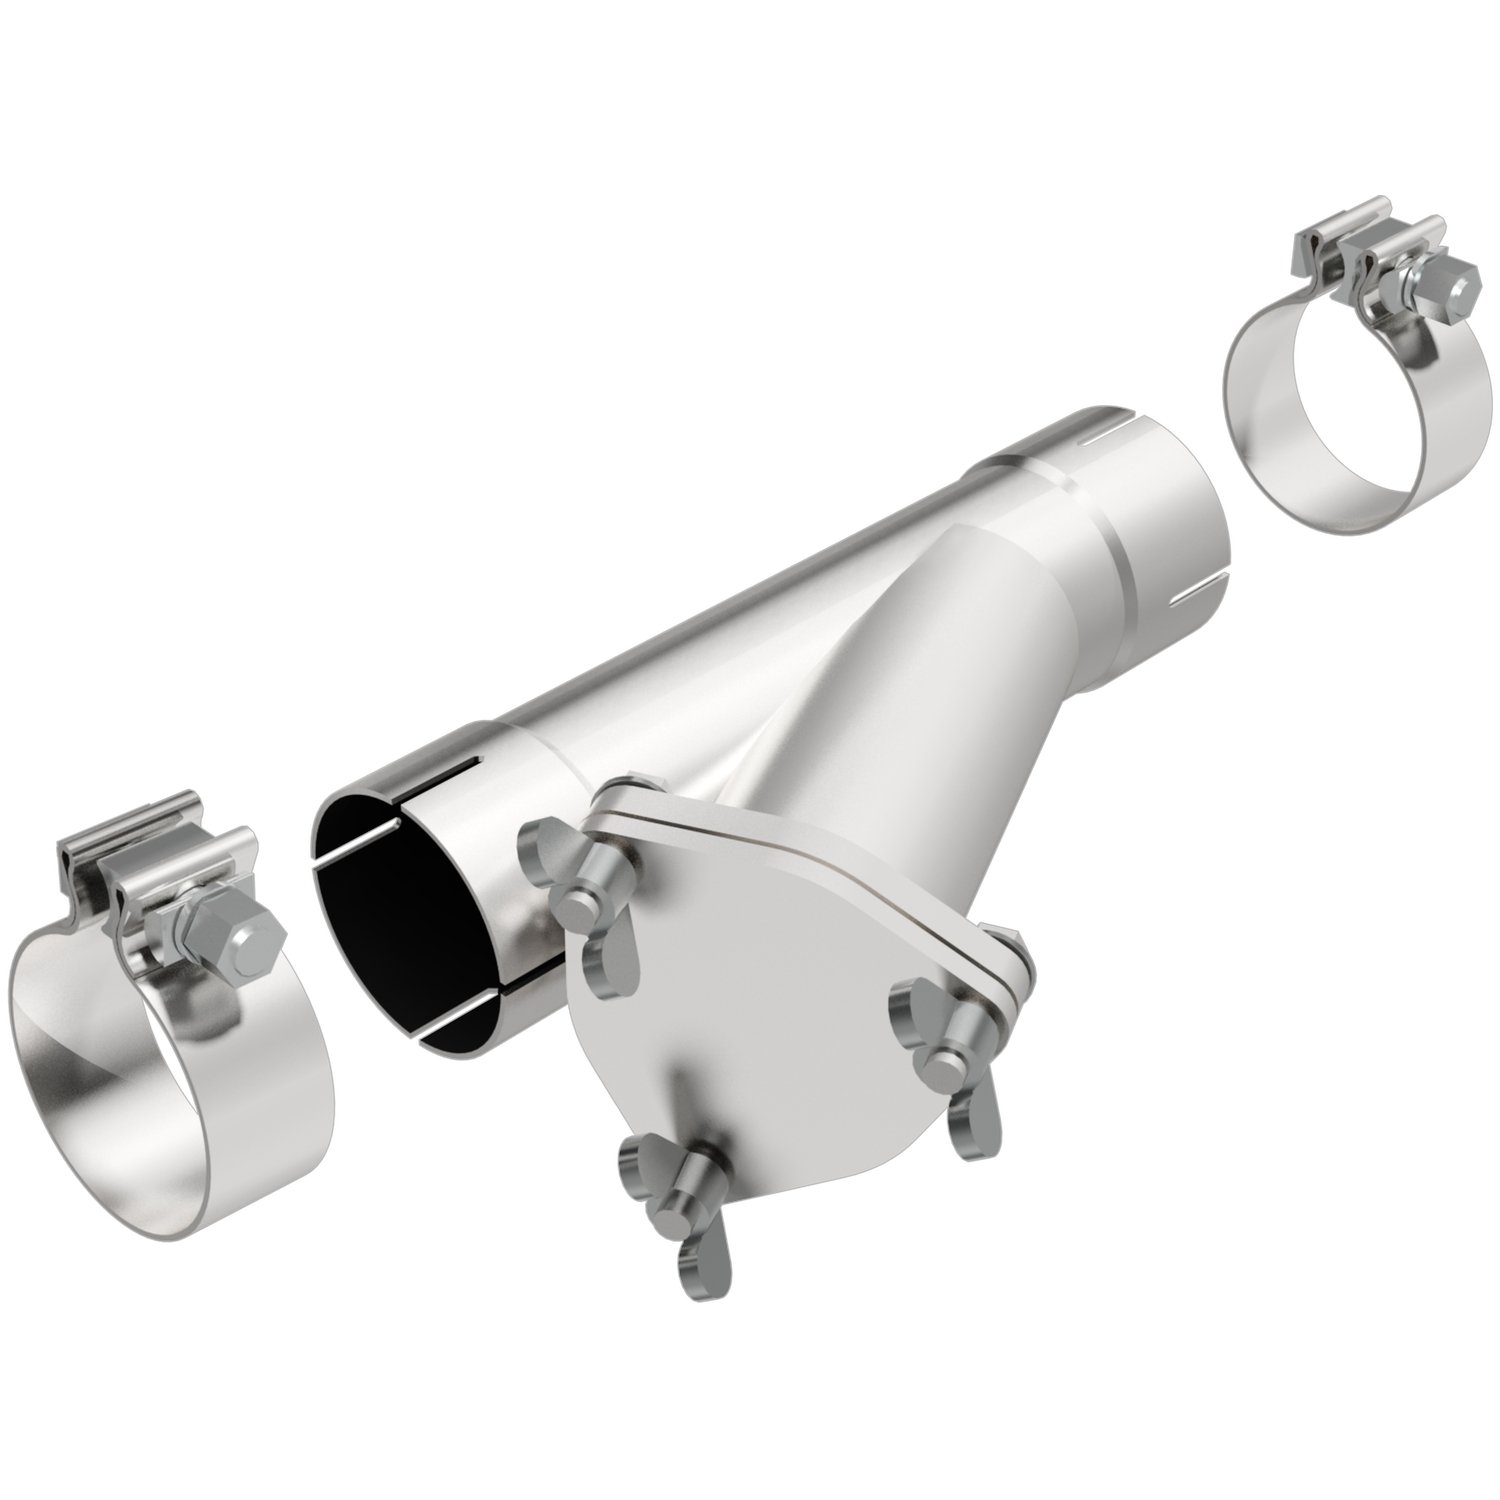 Stainless Steel Exhaust Cutout Outside Diameter: 2.25"